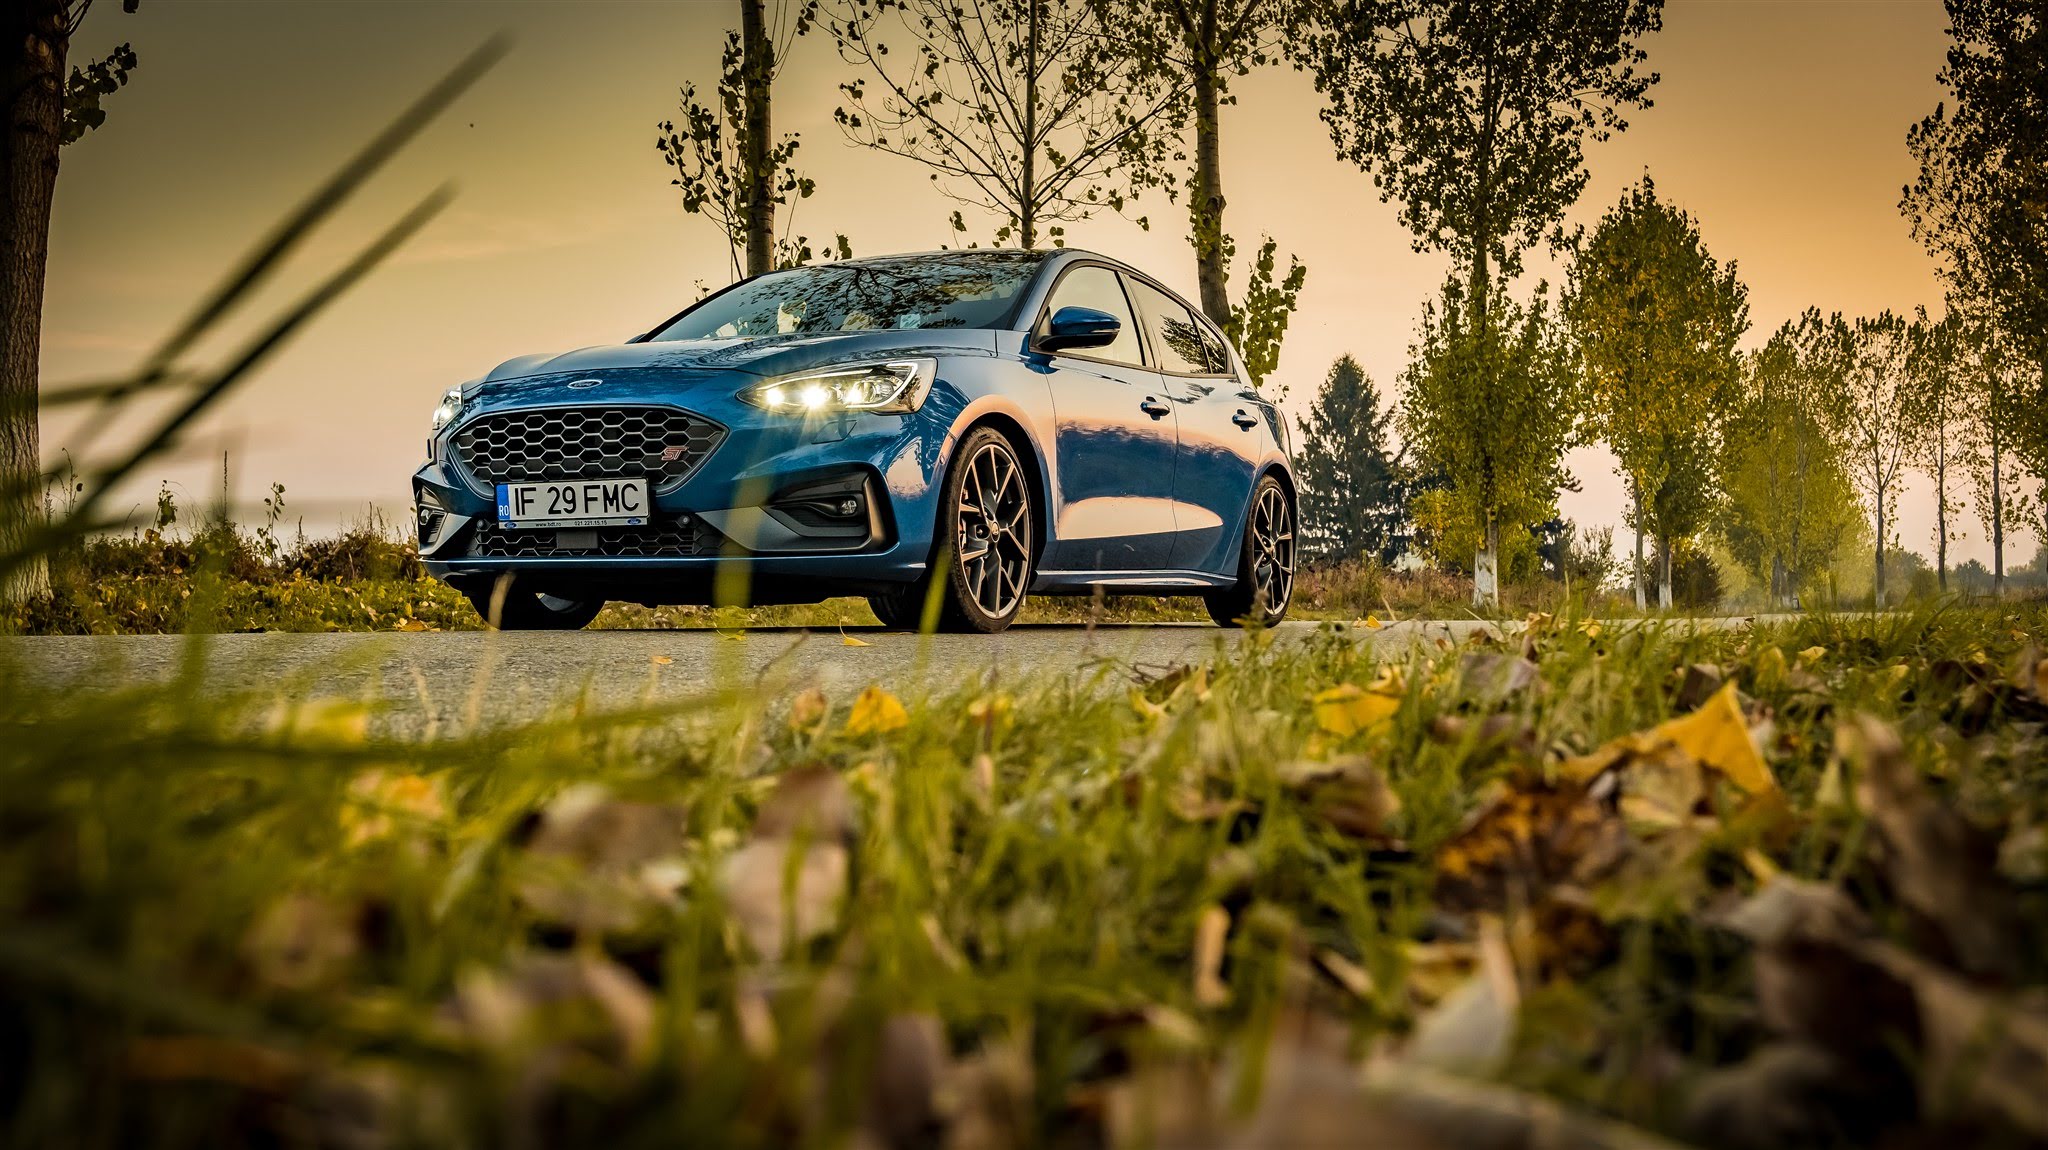 https://www.gadget.ro/wp-content/uploads/2019/12/Ford-Focus-ST-2019-2.3-EcoBoost-280-CP-M6-6.jpg